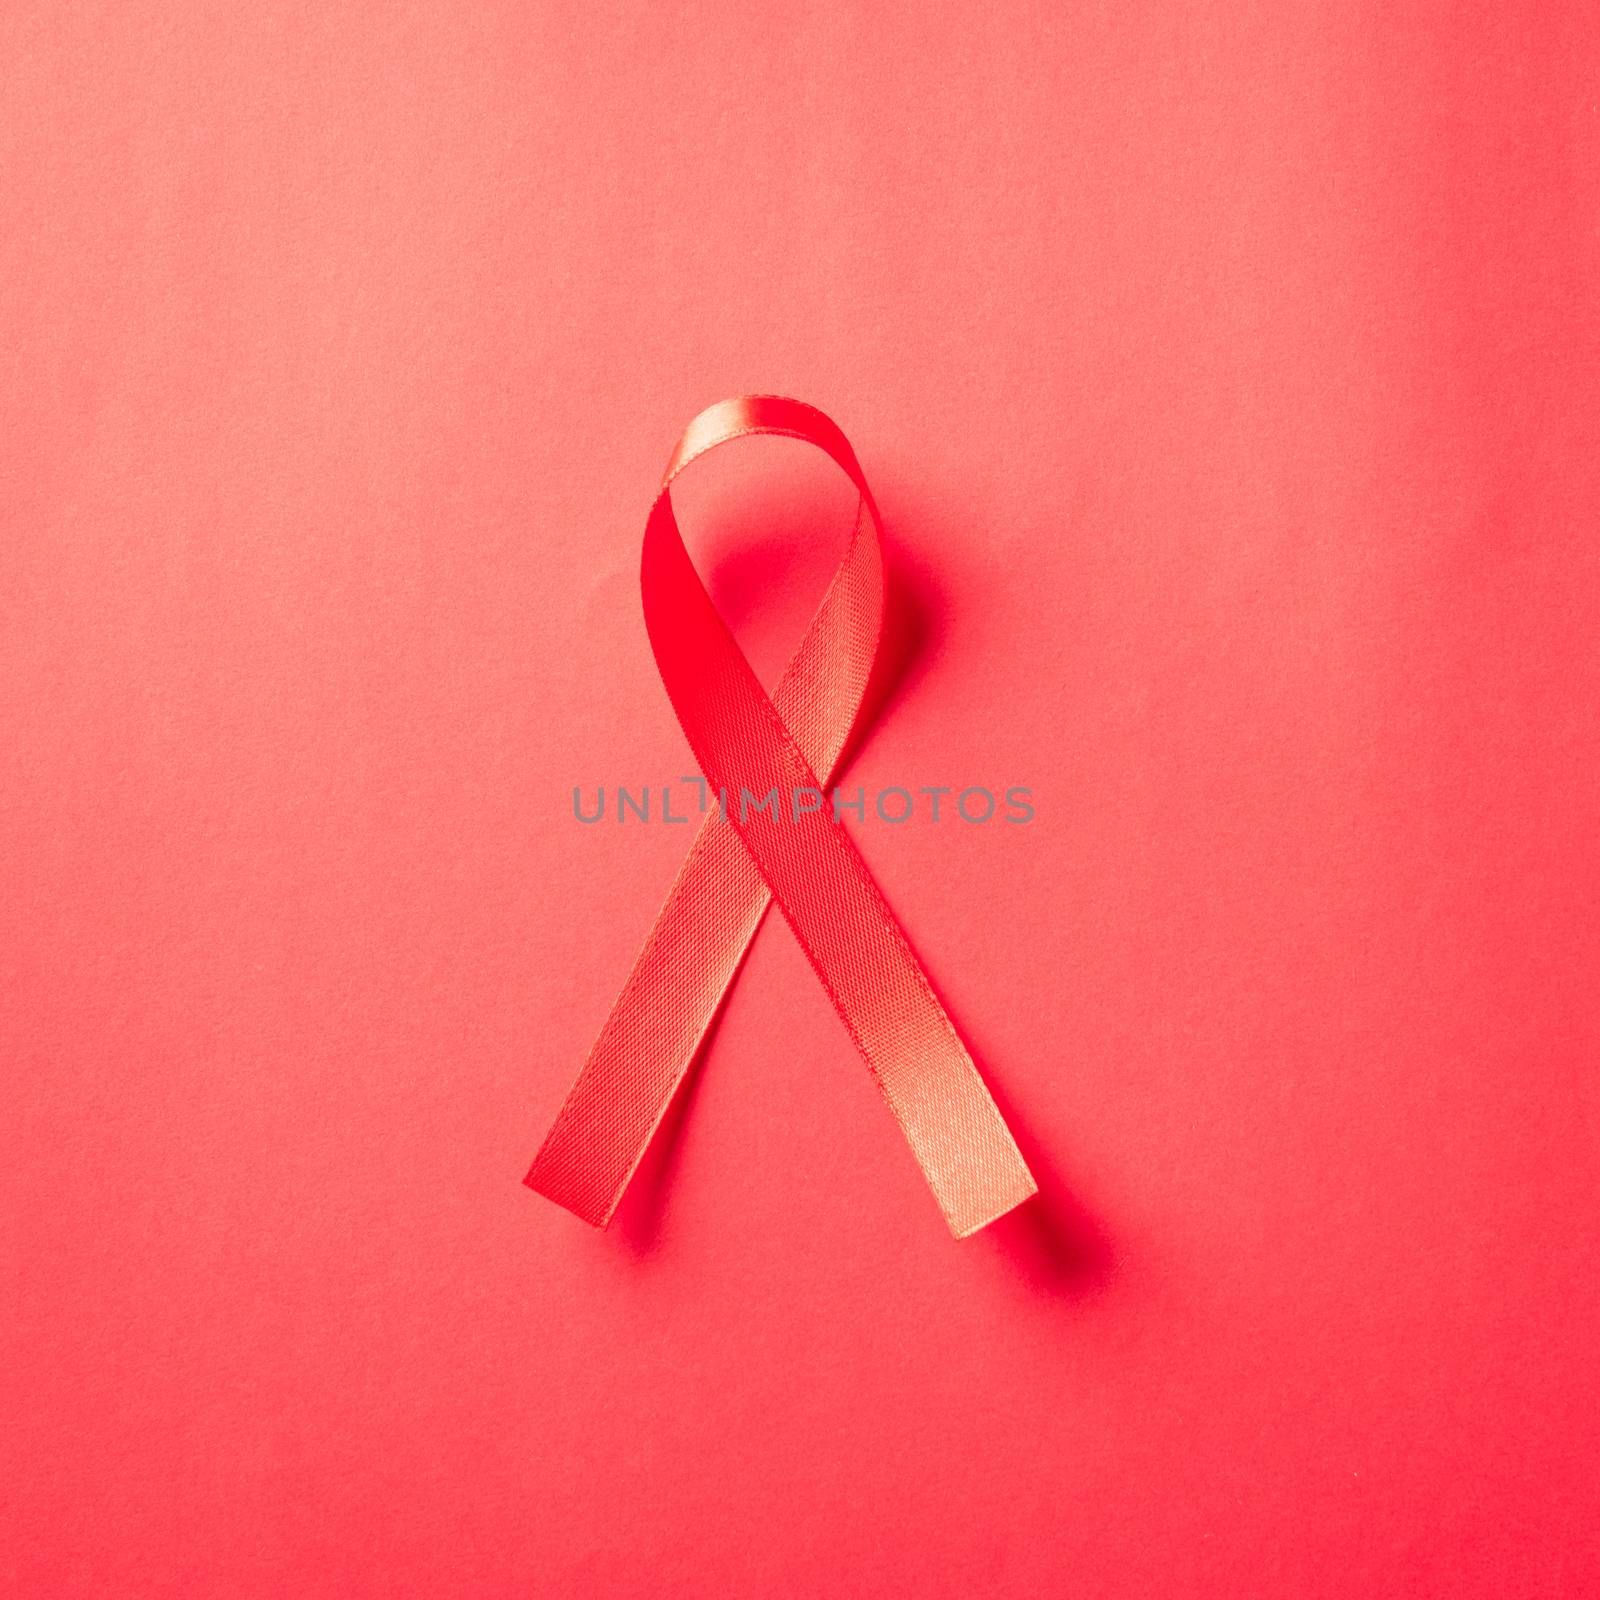 Red bow ribbon symbol HIV, AIDS cancer awareness with shadows, studio shot isolated on red background, Healthcare medicine concept, World AIDS Day